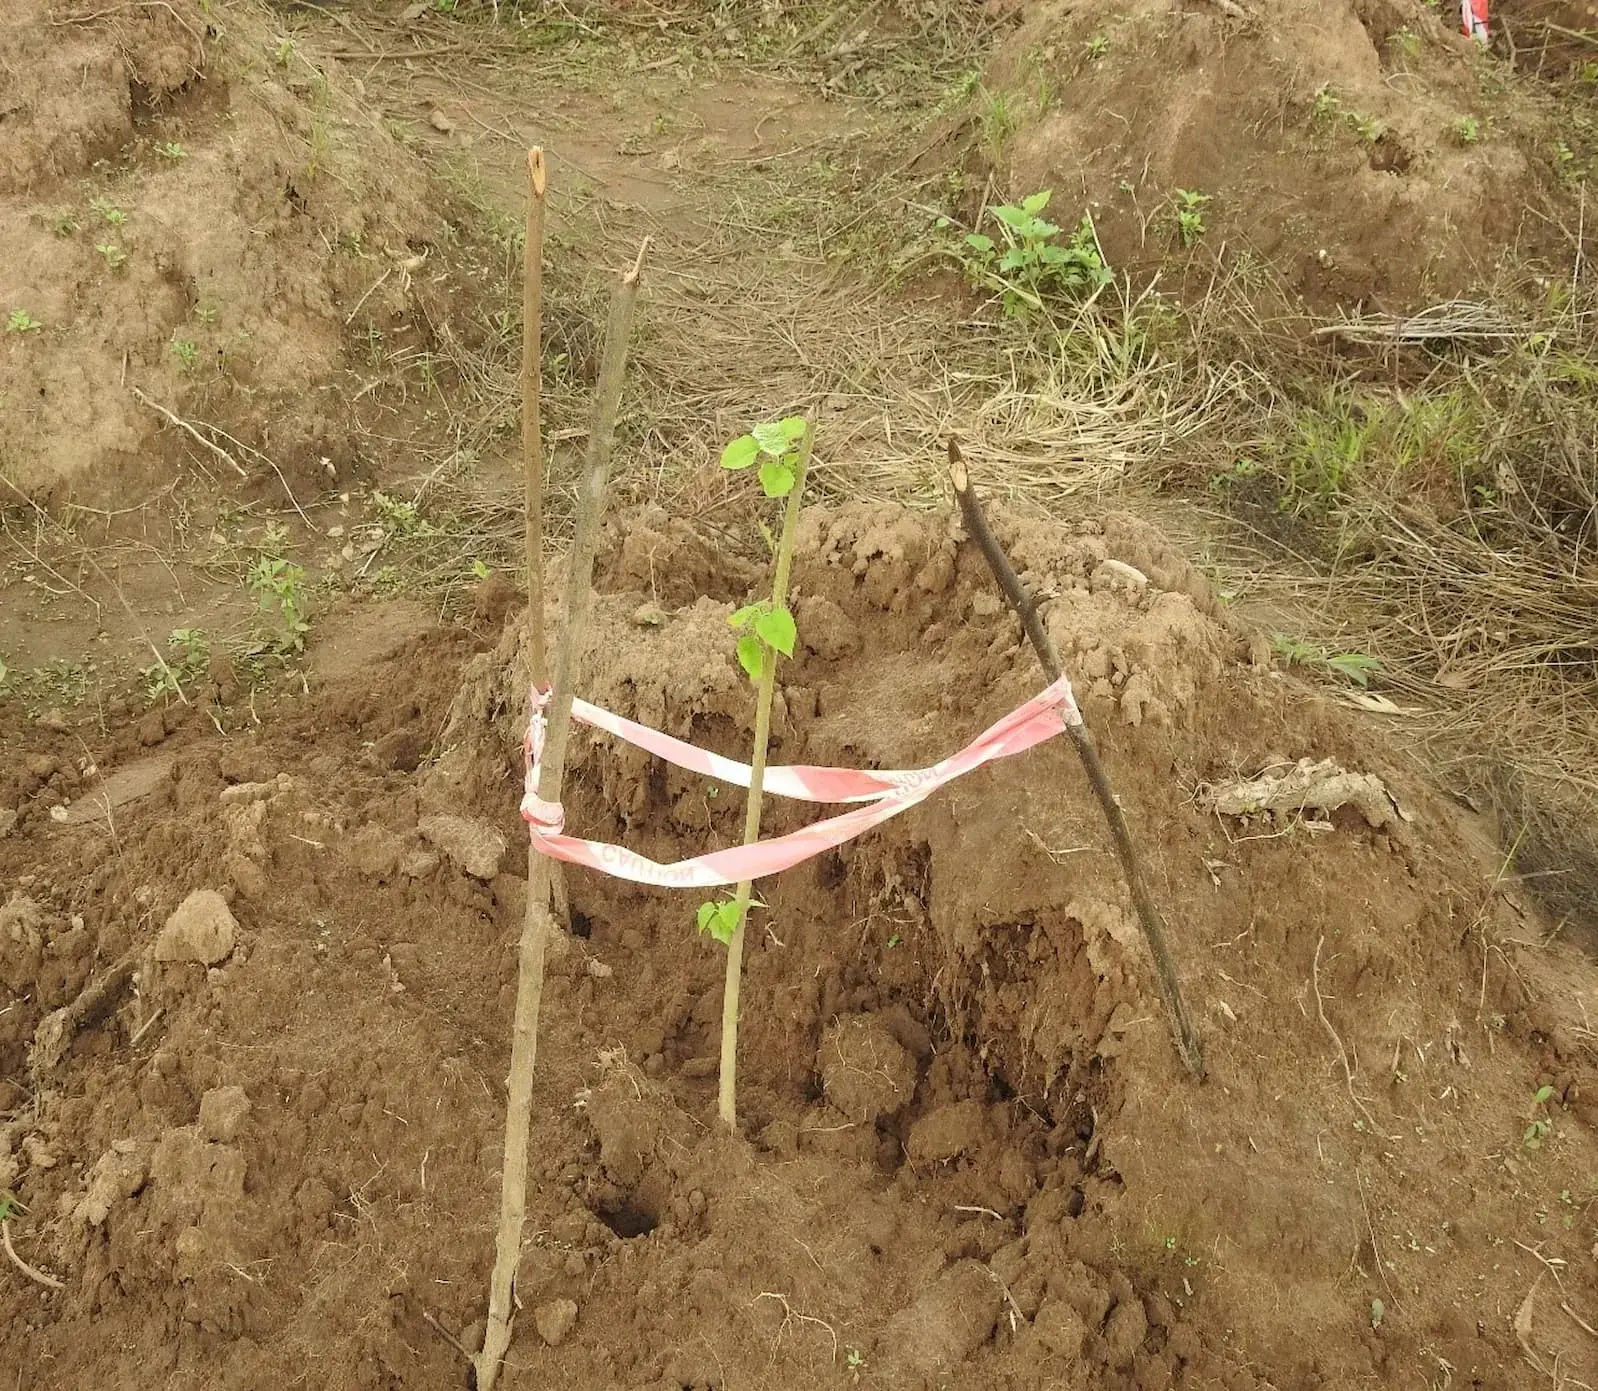 Tree planting by NCF